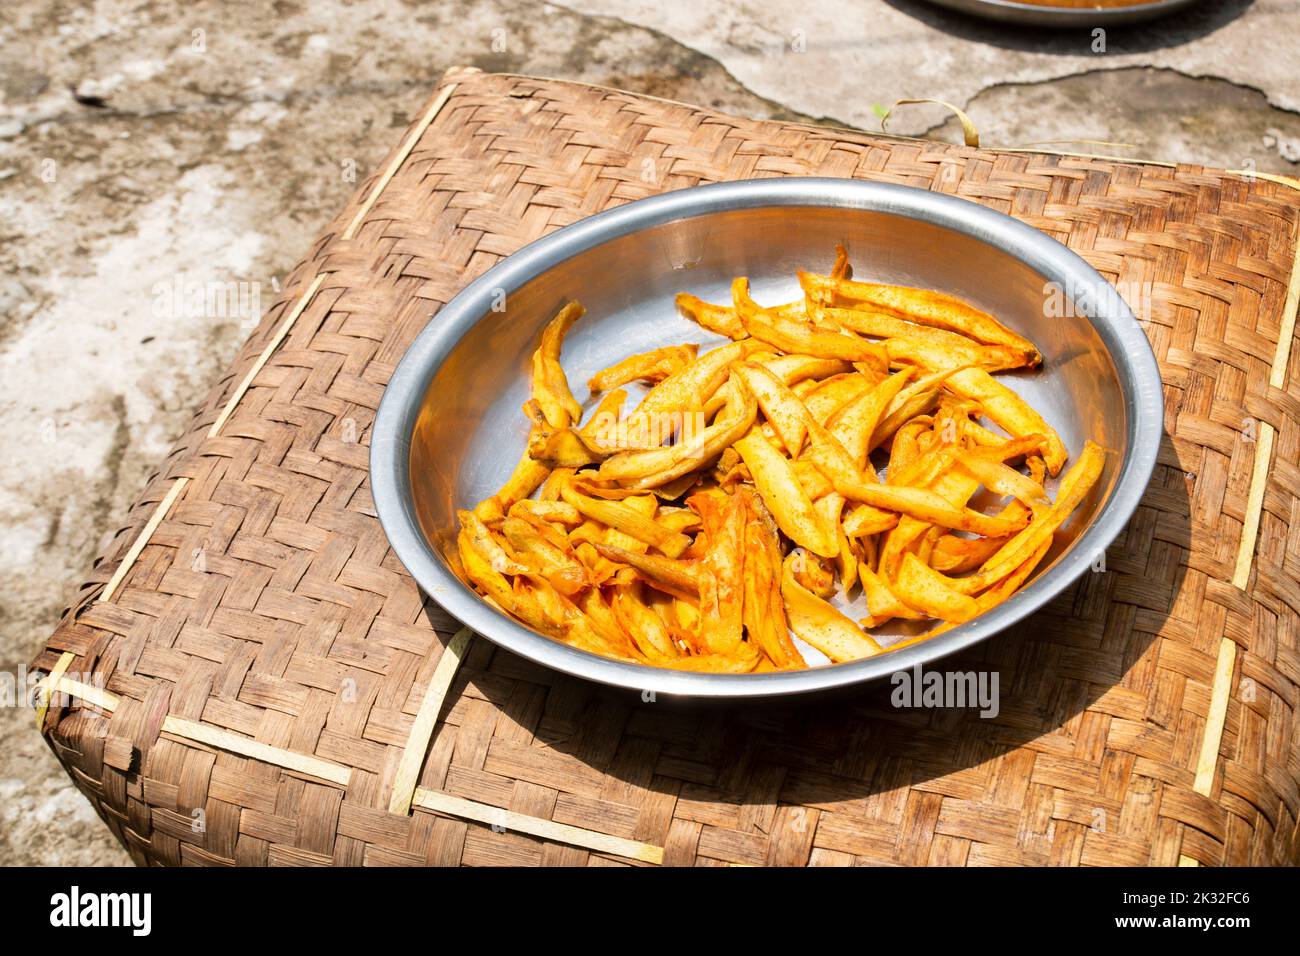 mango slices under the sun to dry it for making mango powder or pickle. Natural food preservation. Stock Photo